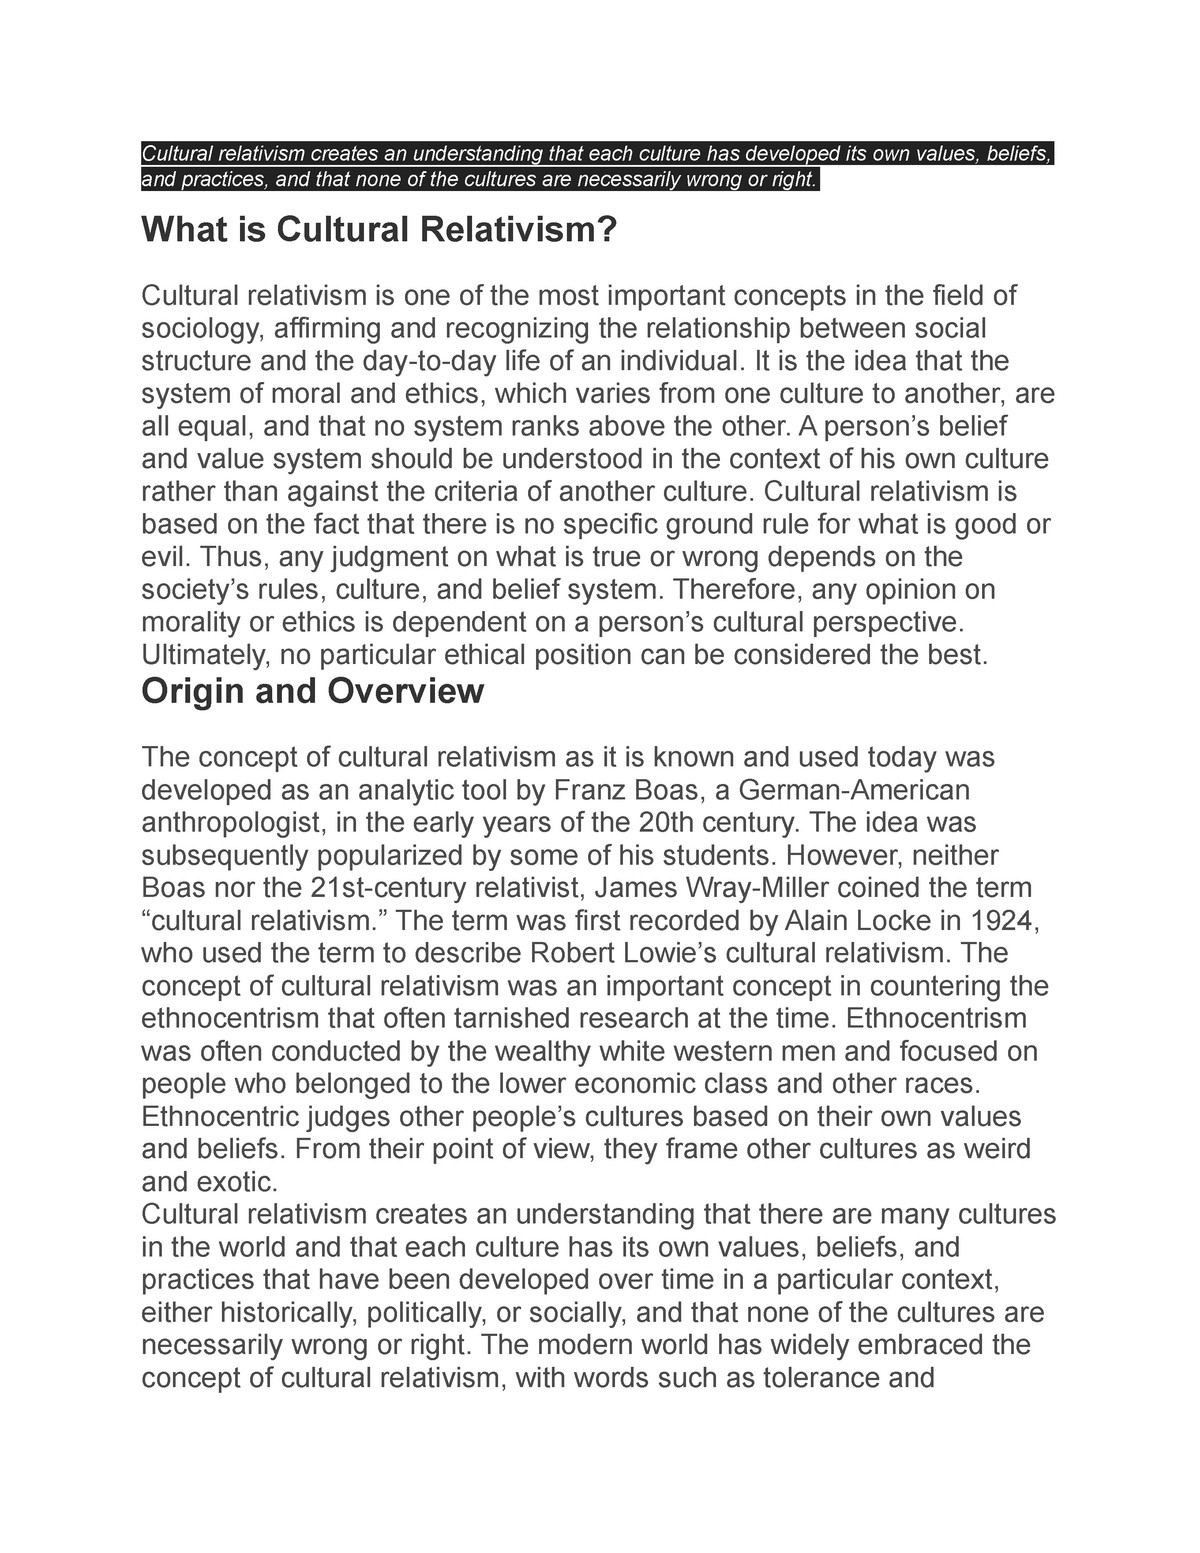 the importance of cultural relativism in attaining cultural understanding essay